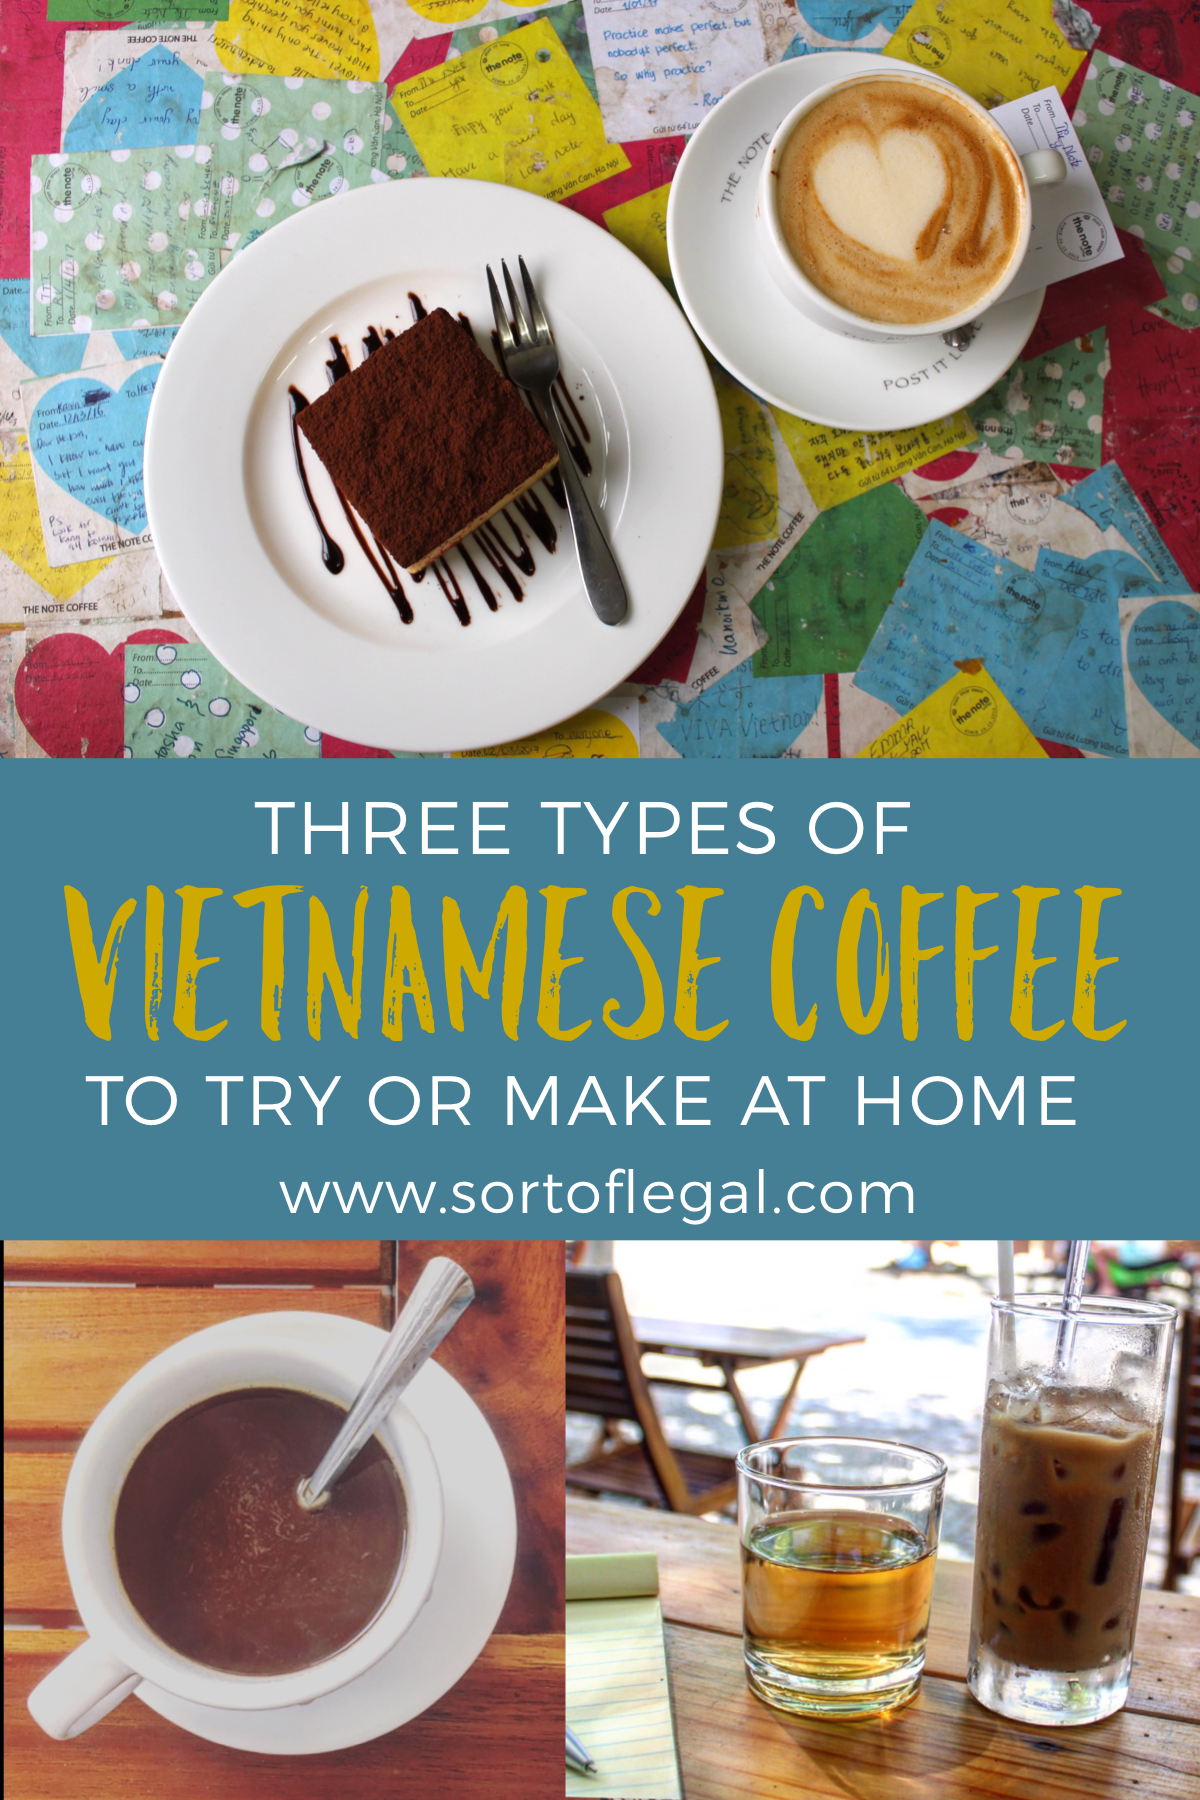 Three Types of Vietnamese Coffee To Try (and where to get it) or make at home with recipes